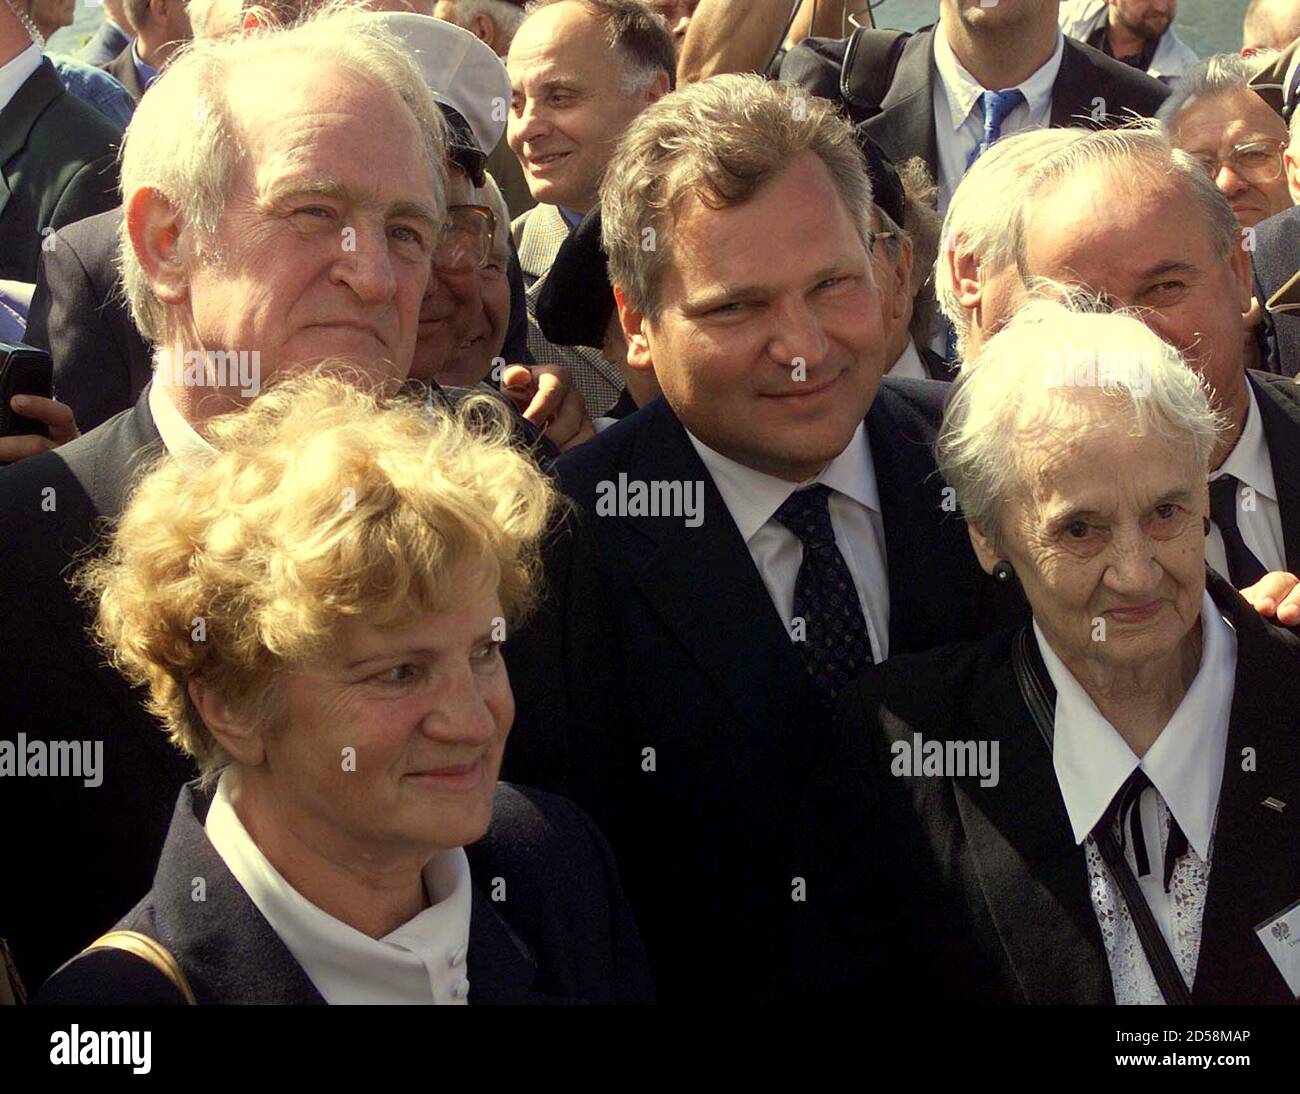 Polish President Aleksander Kwasniewski (C) and his German counterpart  Johannes Rau (L) pose for a picture together with World War II veterans  Janina Brzozowska (L) and Zofia Gawlicz (R) in front of